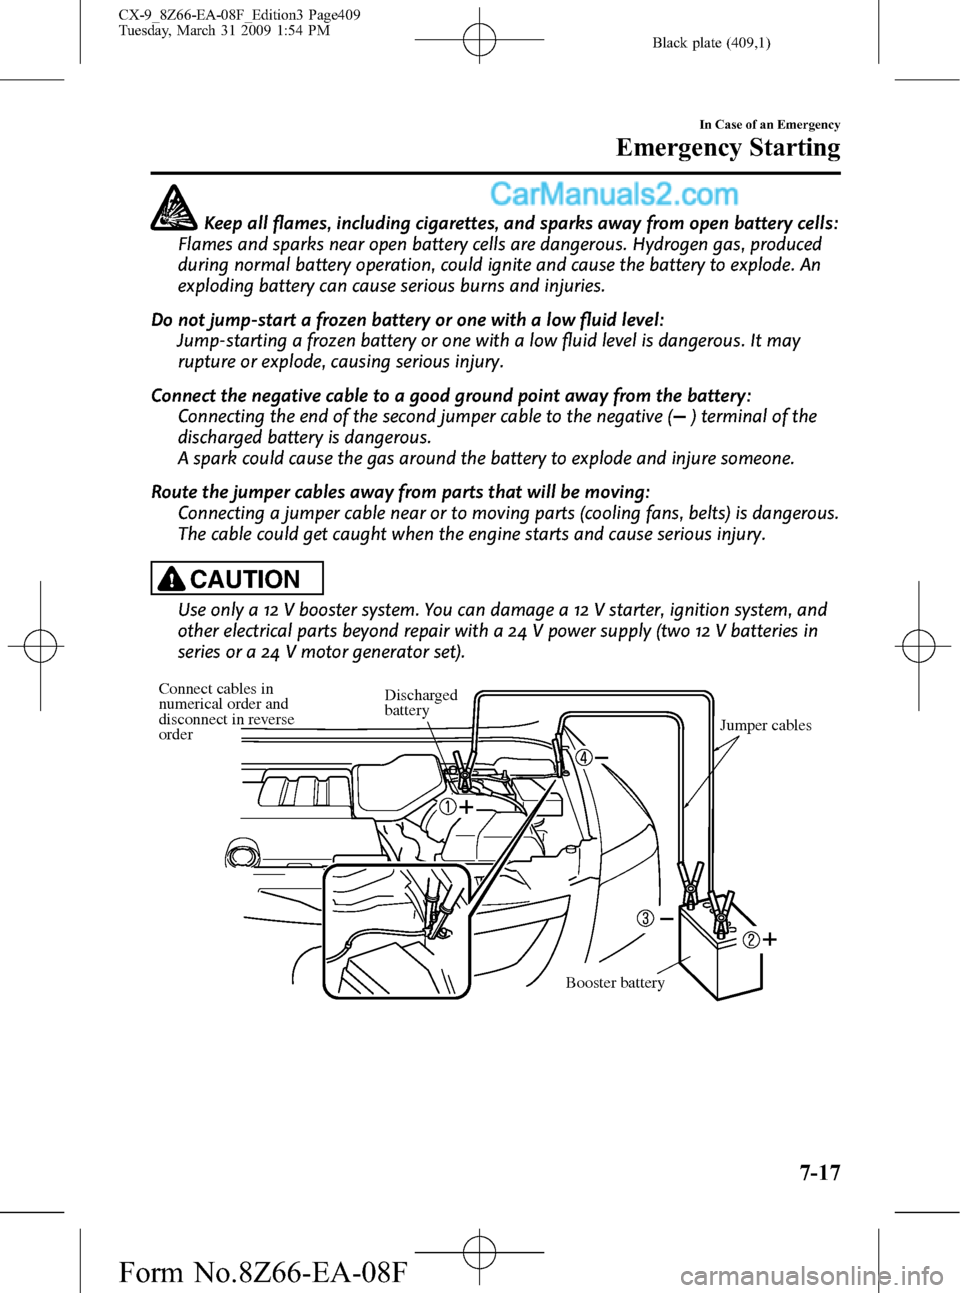 MAZDA MODEL CX-9 2009  Owners Manual (in English) Black plate (409,1)
Keep all flames, including cigarettes, and sparks away from open battery cells:
Flames and sparks near open battery cells are dangerous. Hydrogen gas, produced
during normal batter